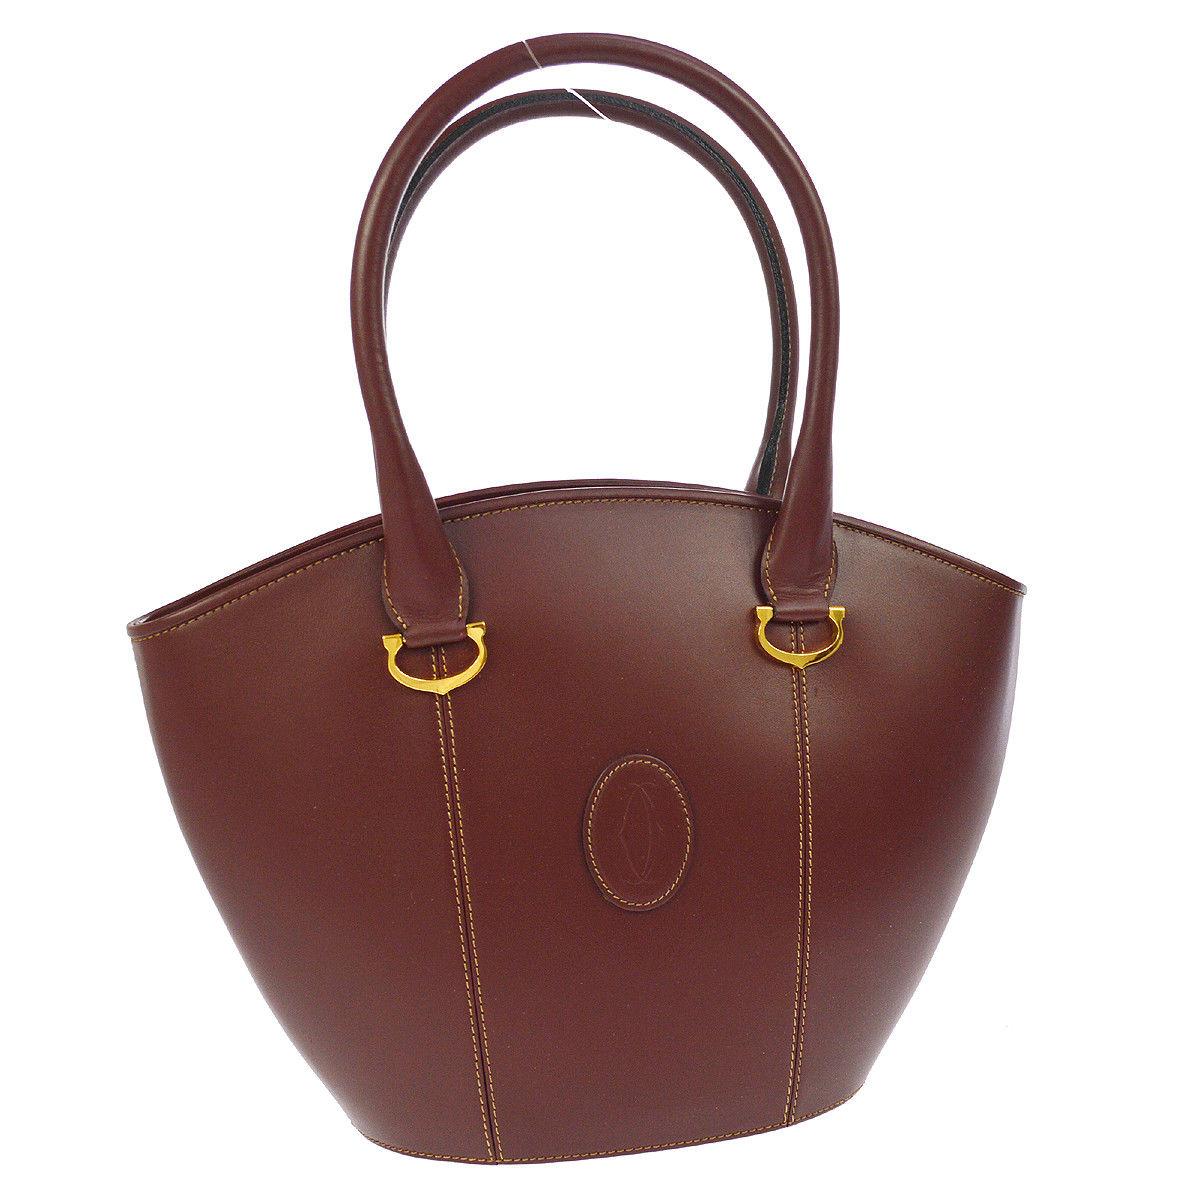 Brown Cartier Burgundy Wine Leather Charm Small Top Handle Satchel Tote Bag in Box